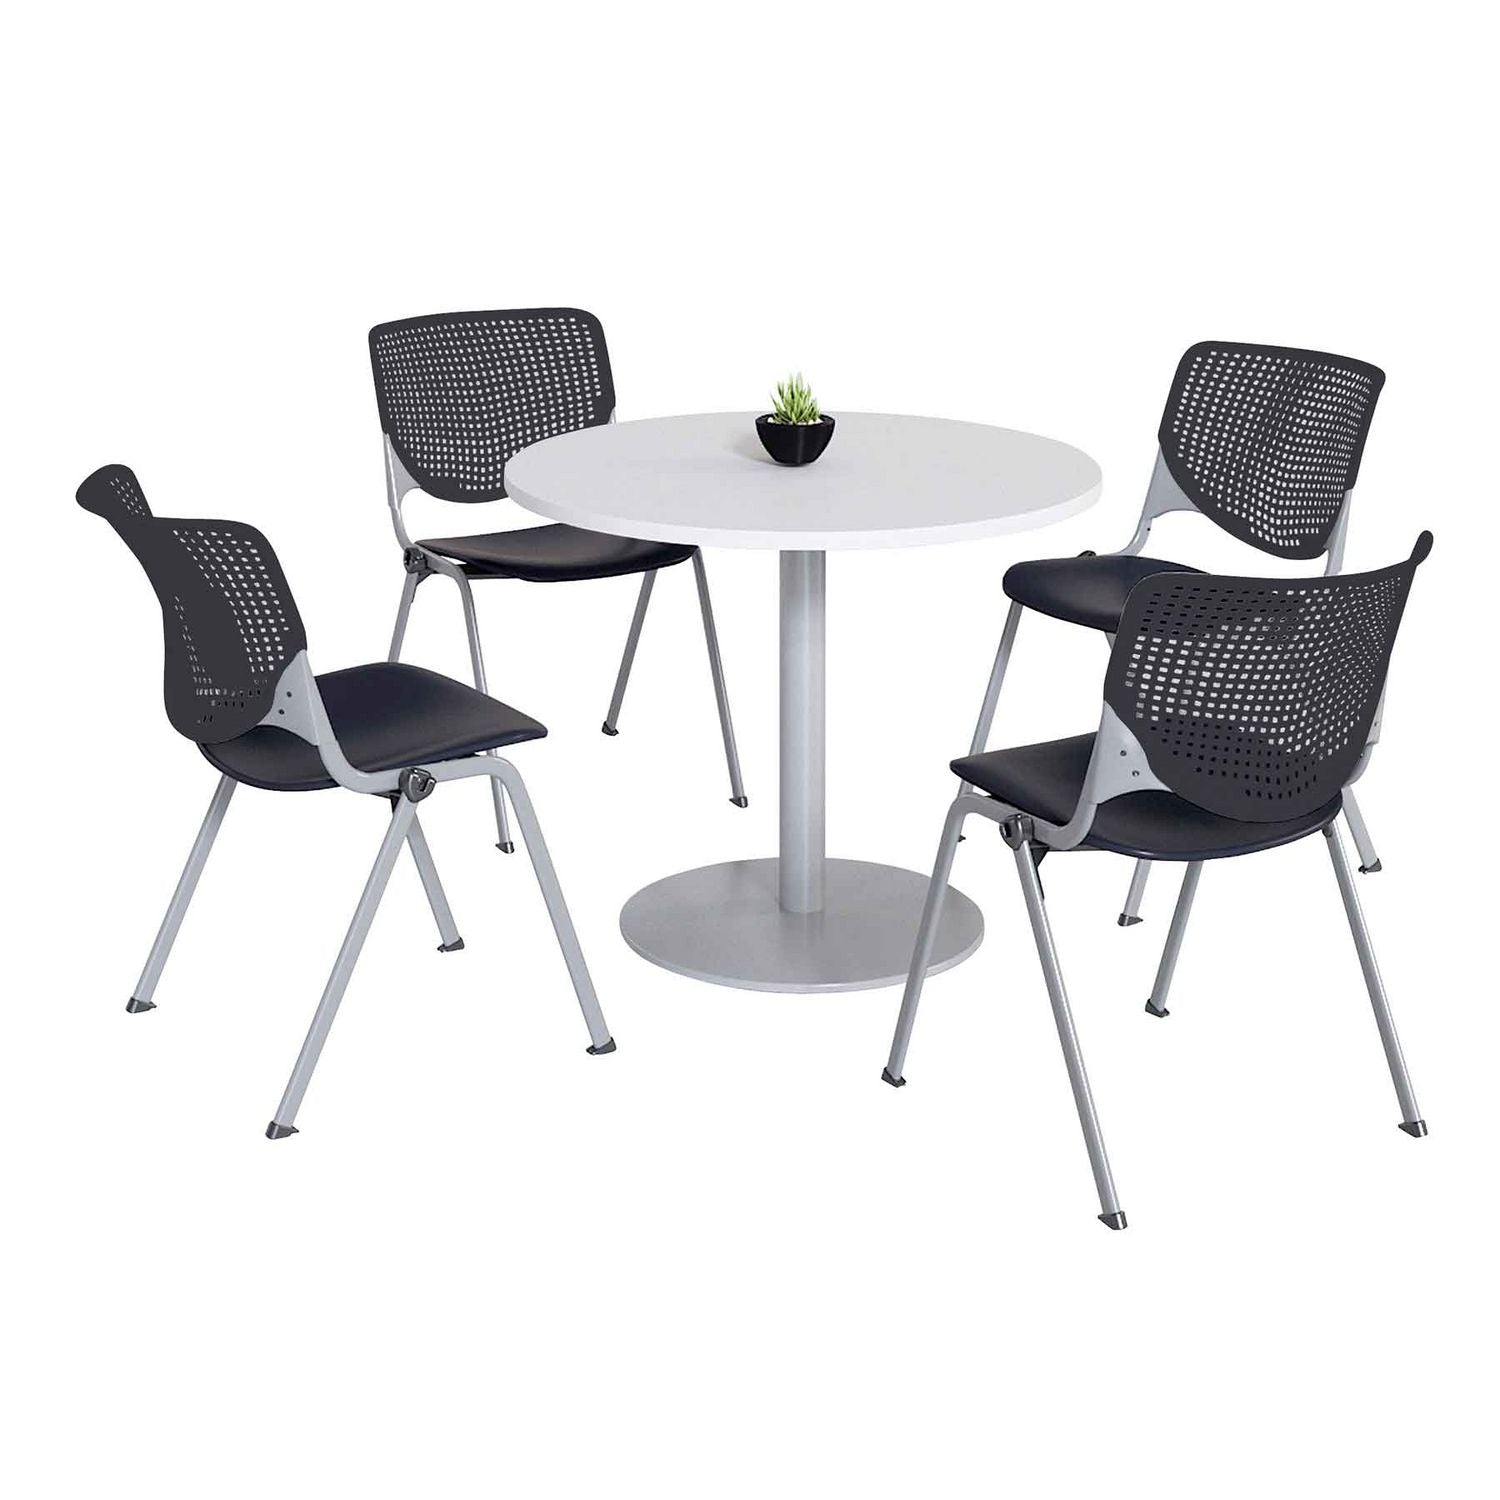 pedestal-table-with-four-black-kool-series-chairs-round-36-dia-x-29h-designer-white-ships-in-4-6-business-days_kfi811774036696 - 1